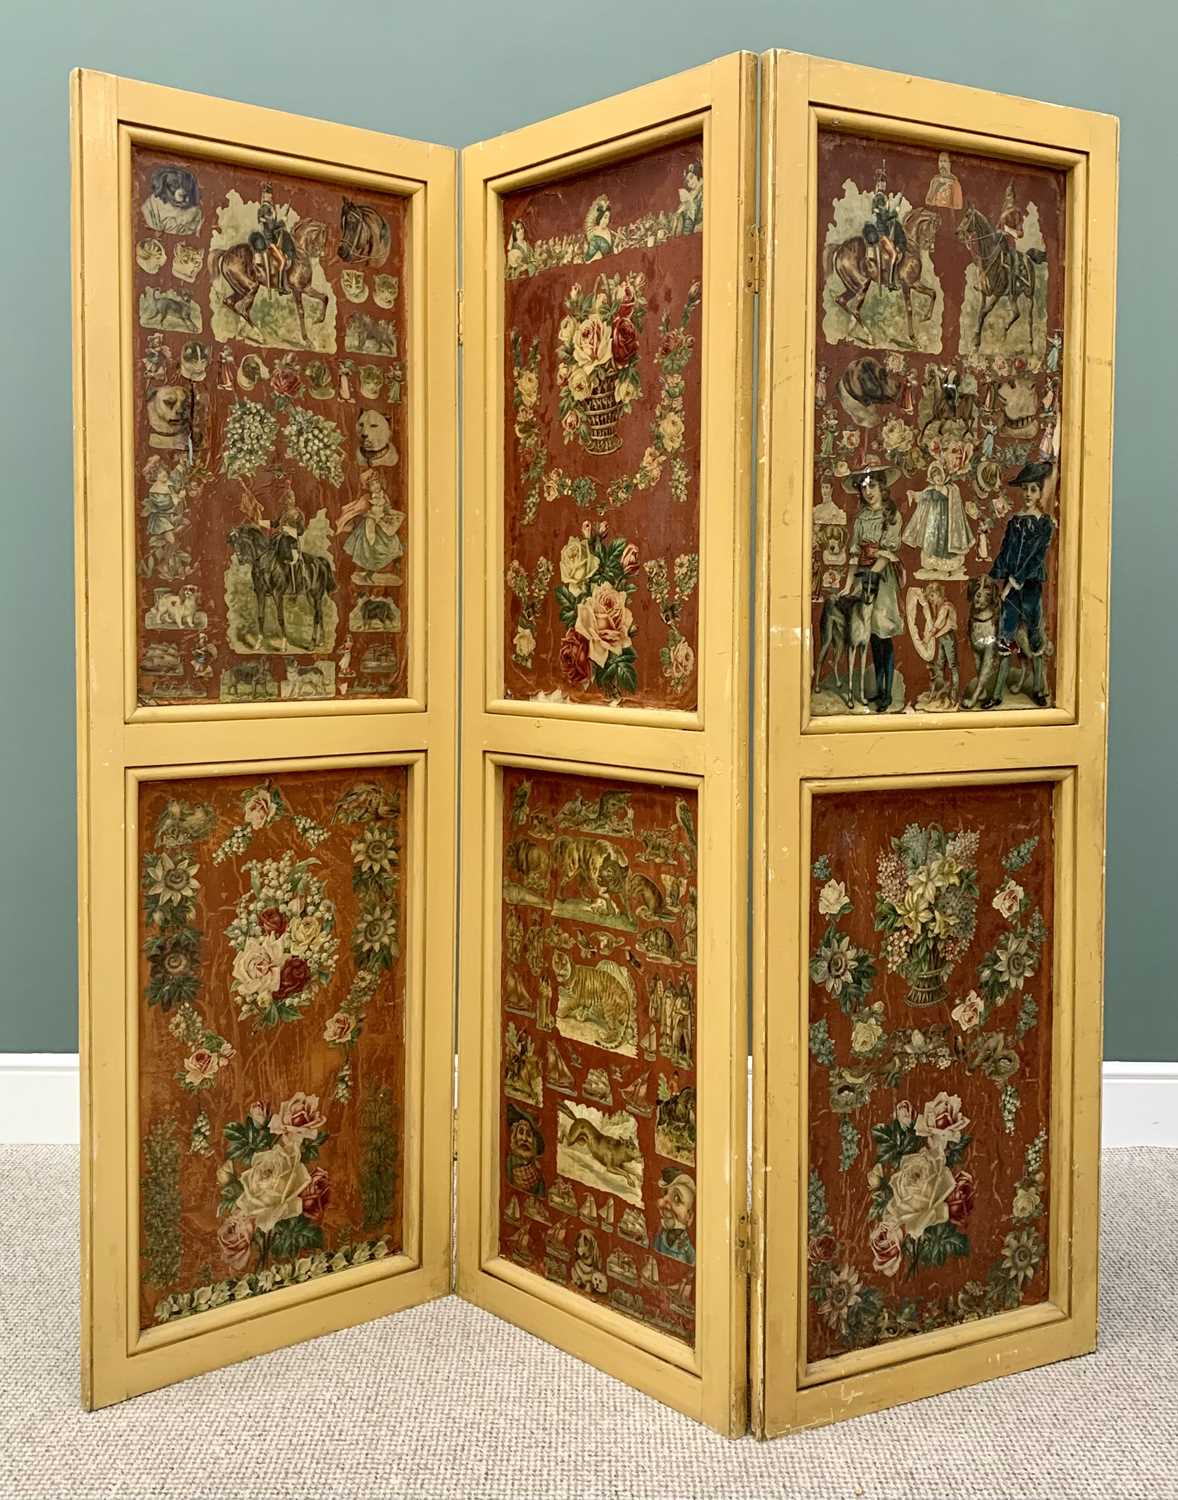 CIRCA 1900 THREE FOLD SCRAP DECORATED DRESSING SCREEN - 168cms H, 168cms W approximately (fully